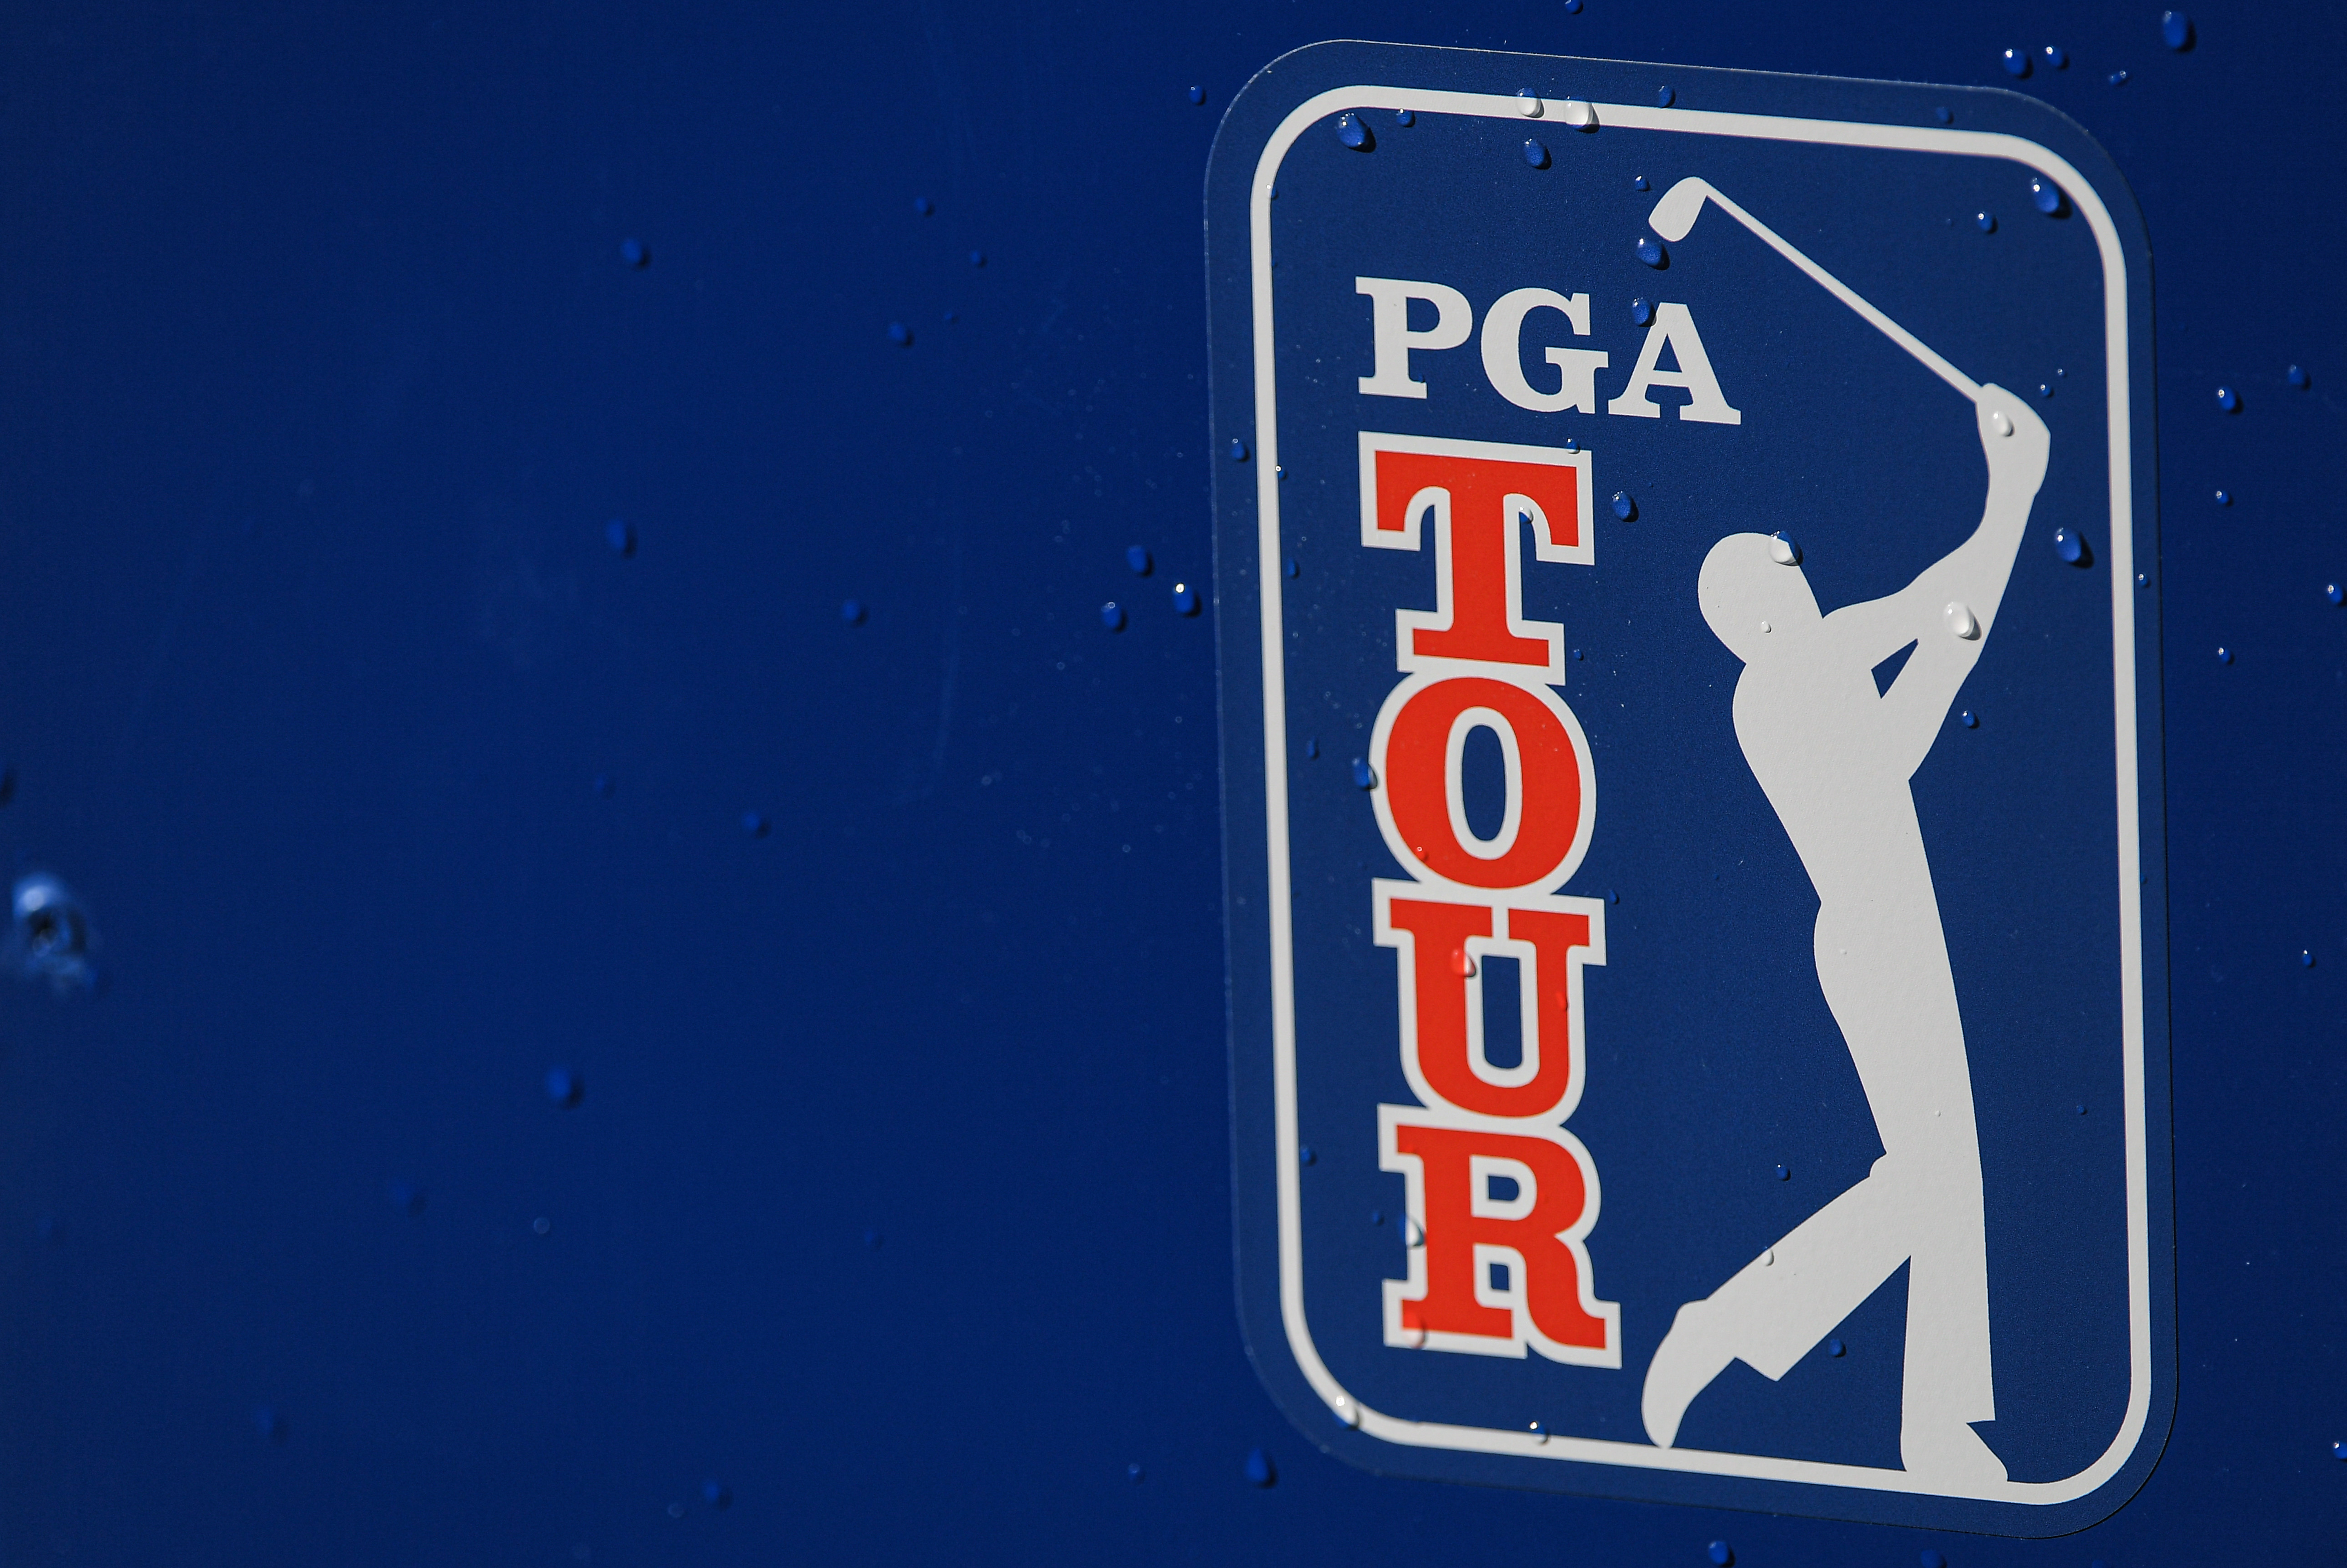 PGA Tour to End Weekly COVID-19 Testing for Players in Late July